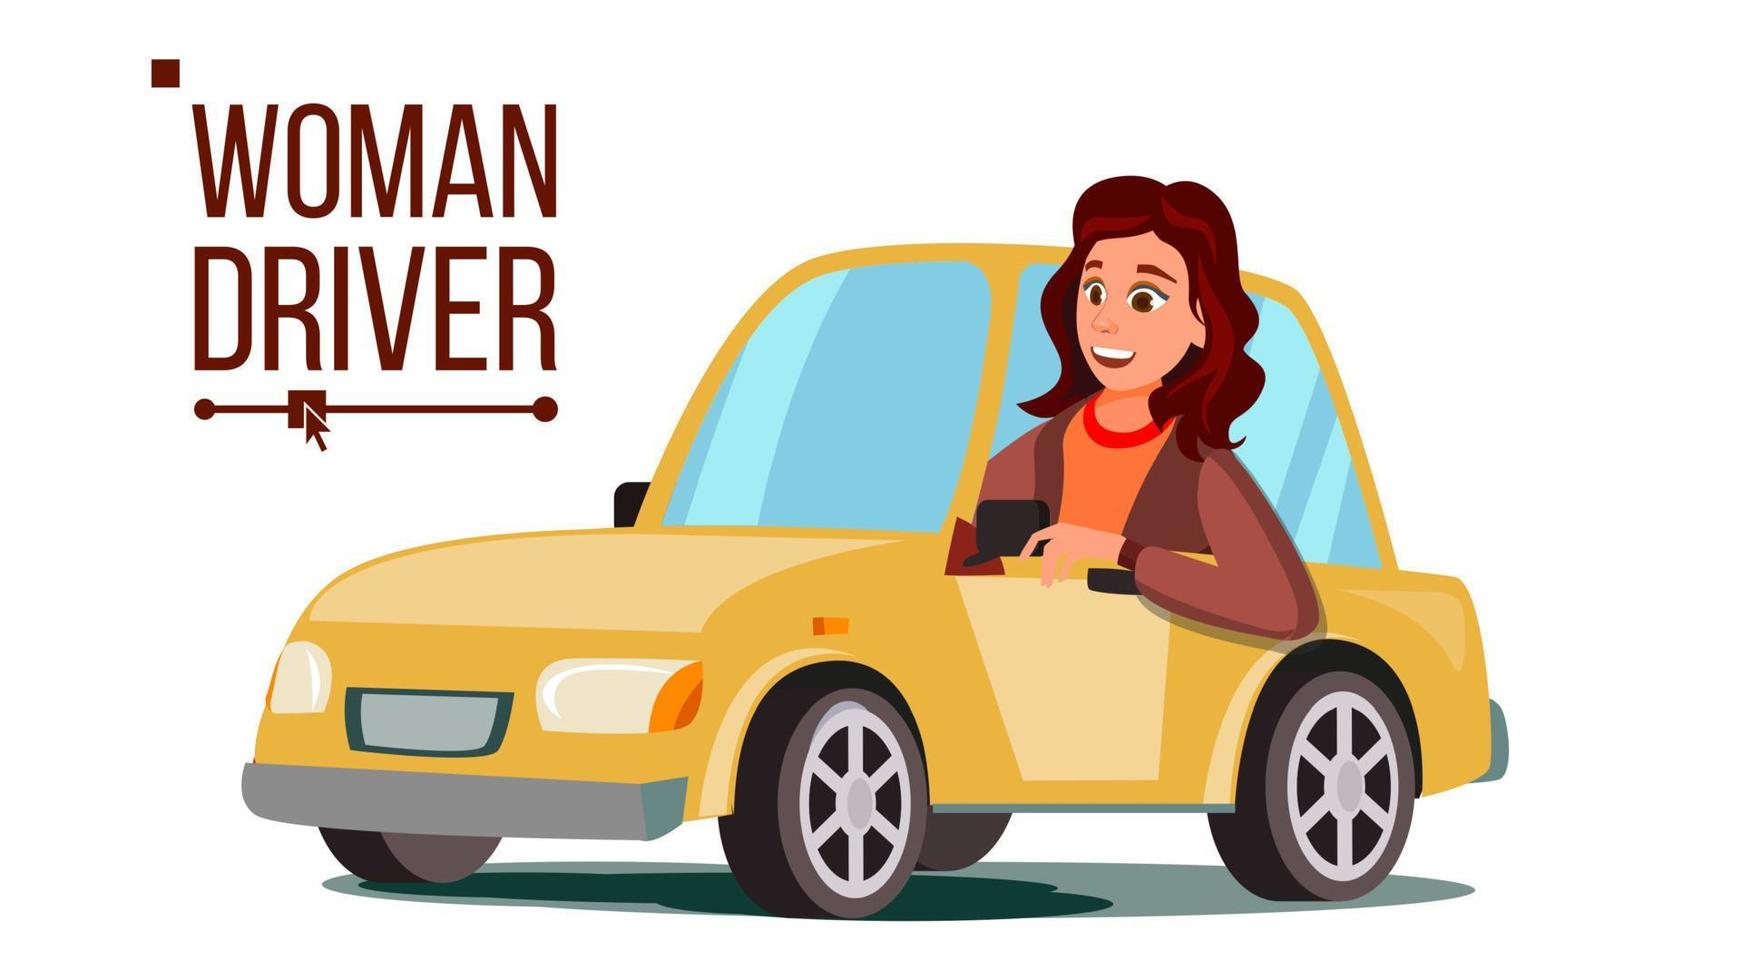 Woman Driver Vector. Sitting In Modern Automobile. Buy A New Car. Driving School Concept. Happy Female Motorist. Isolated Flat Cartoon Character Illustration vector